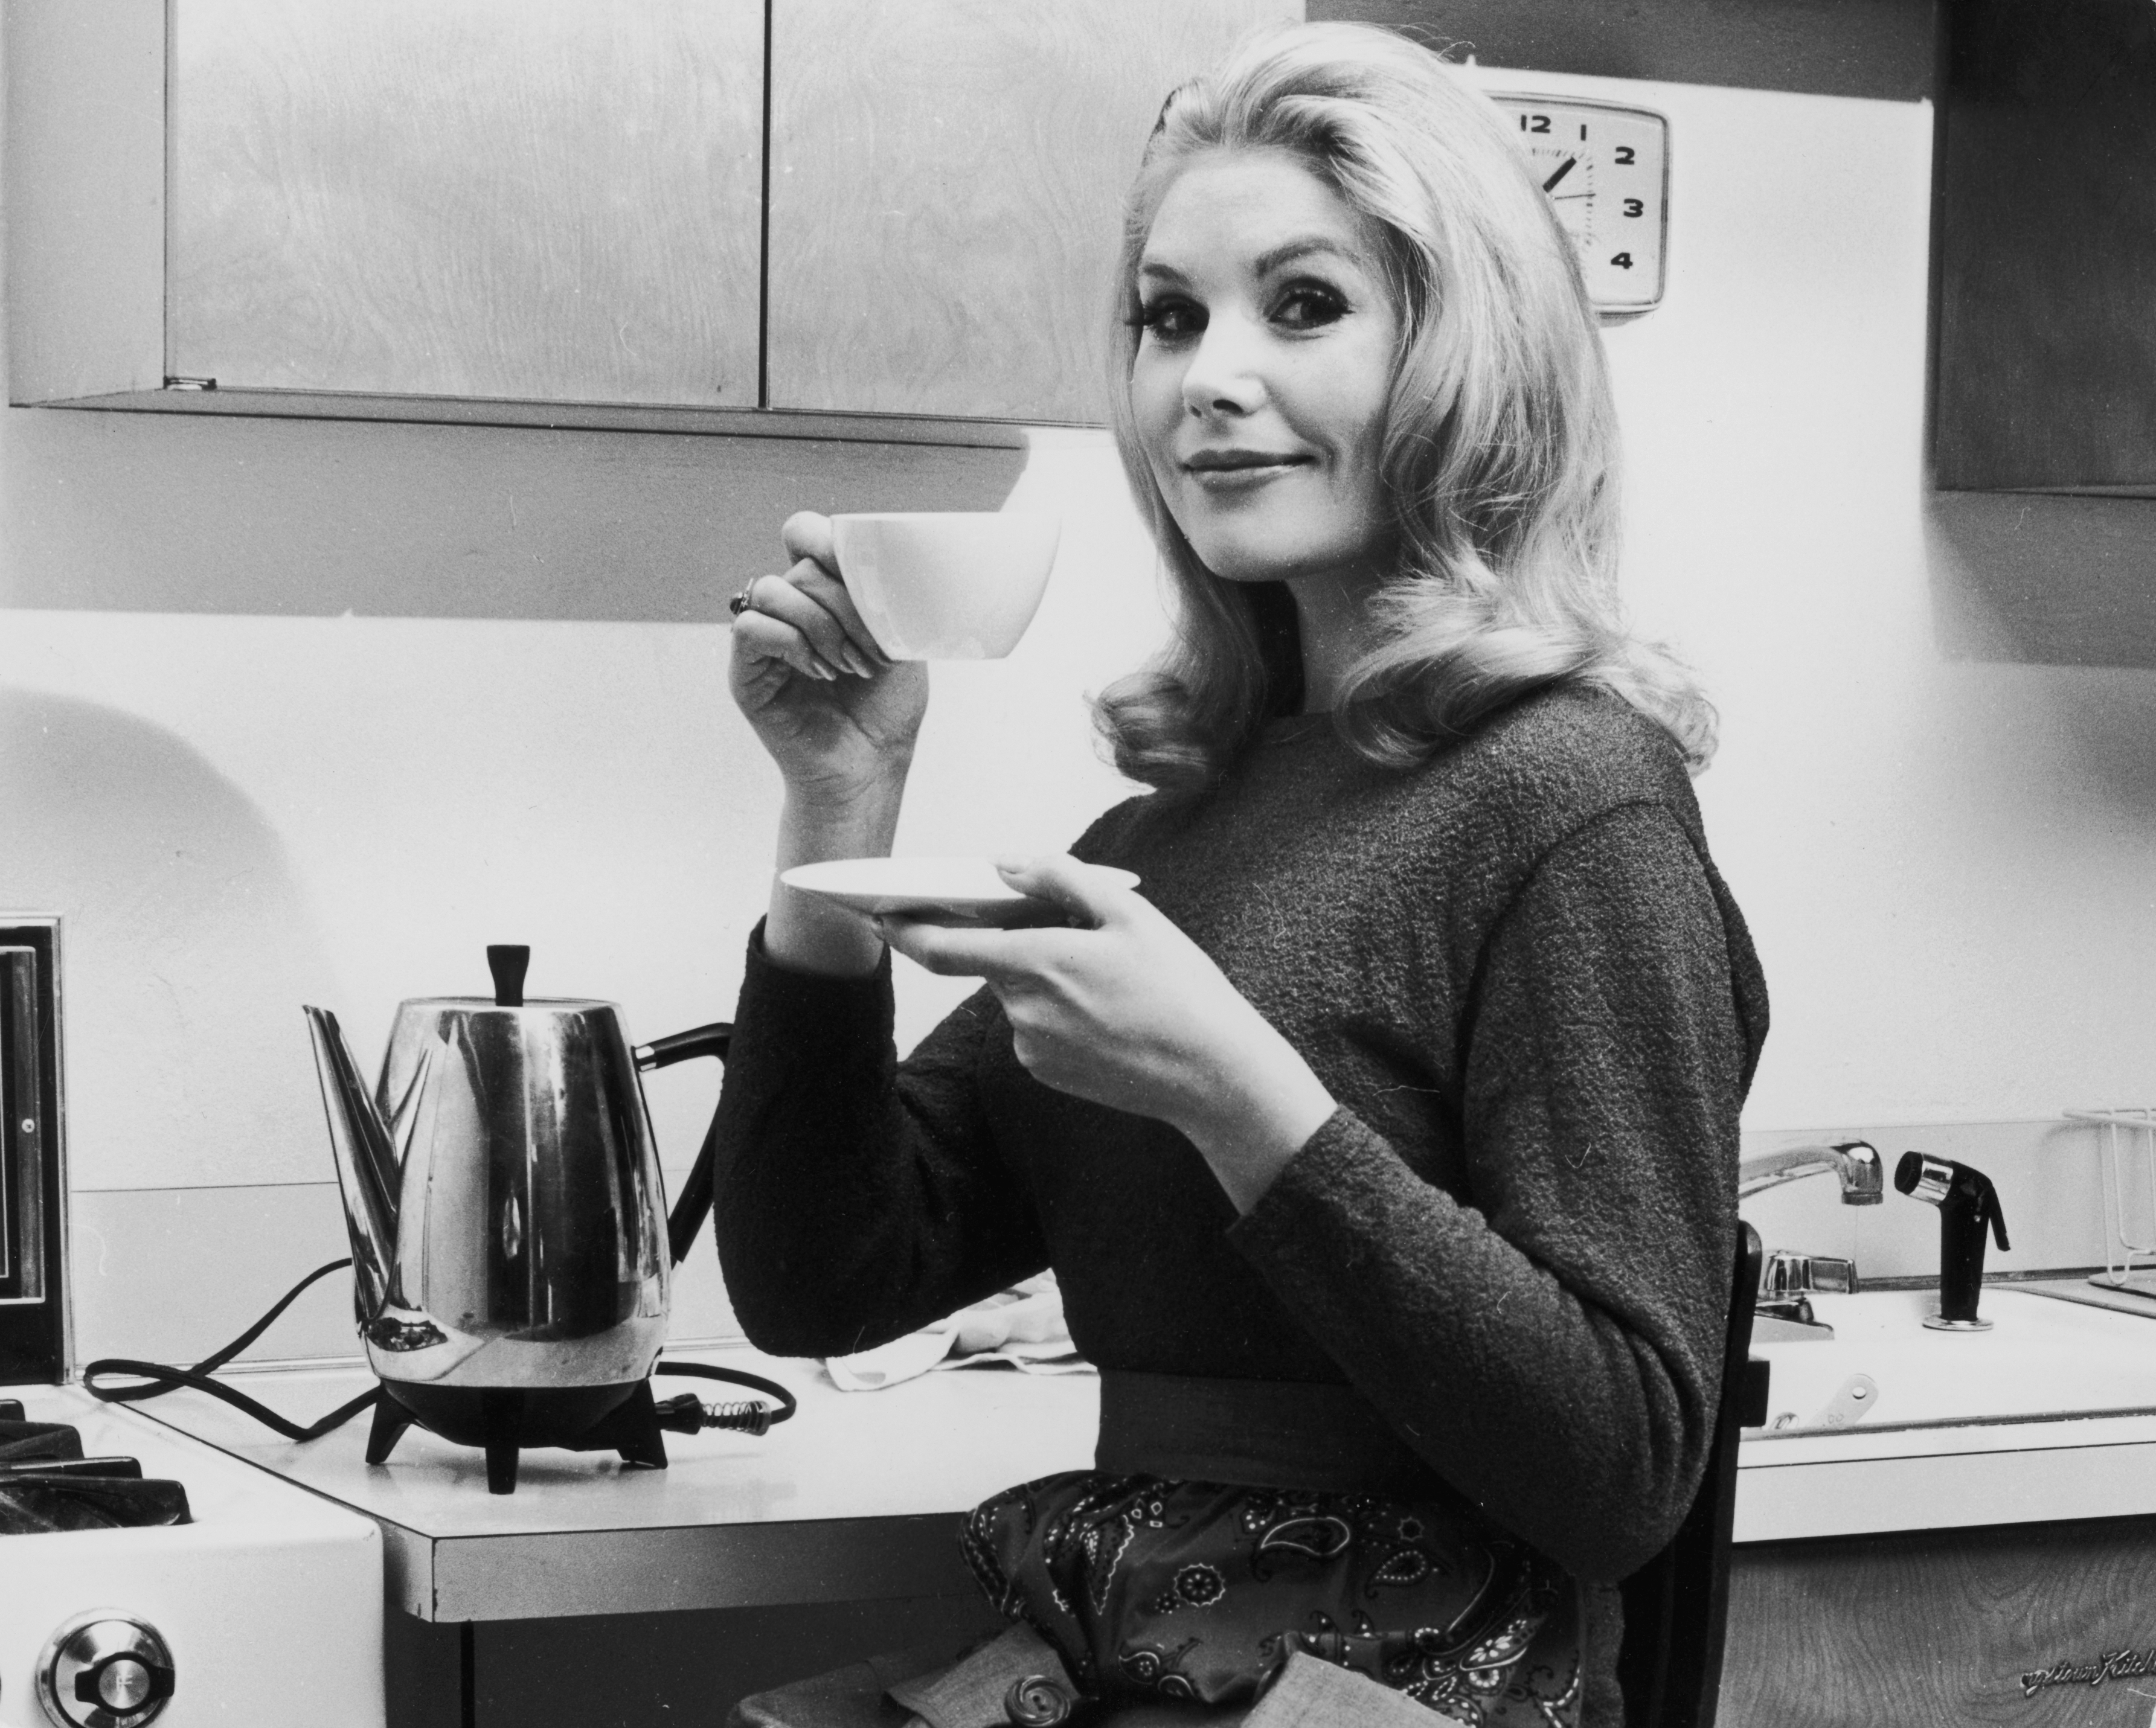 circa 1965: A woman lifts a cup of coffee off a saucer in a kitchen. (Photo by Leo Vals/Hulton Archive/Getty Images)